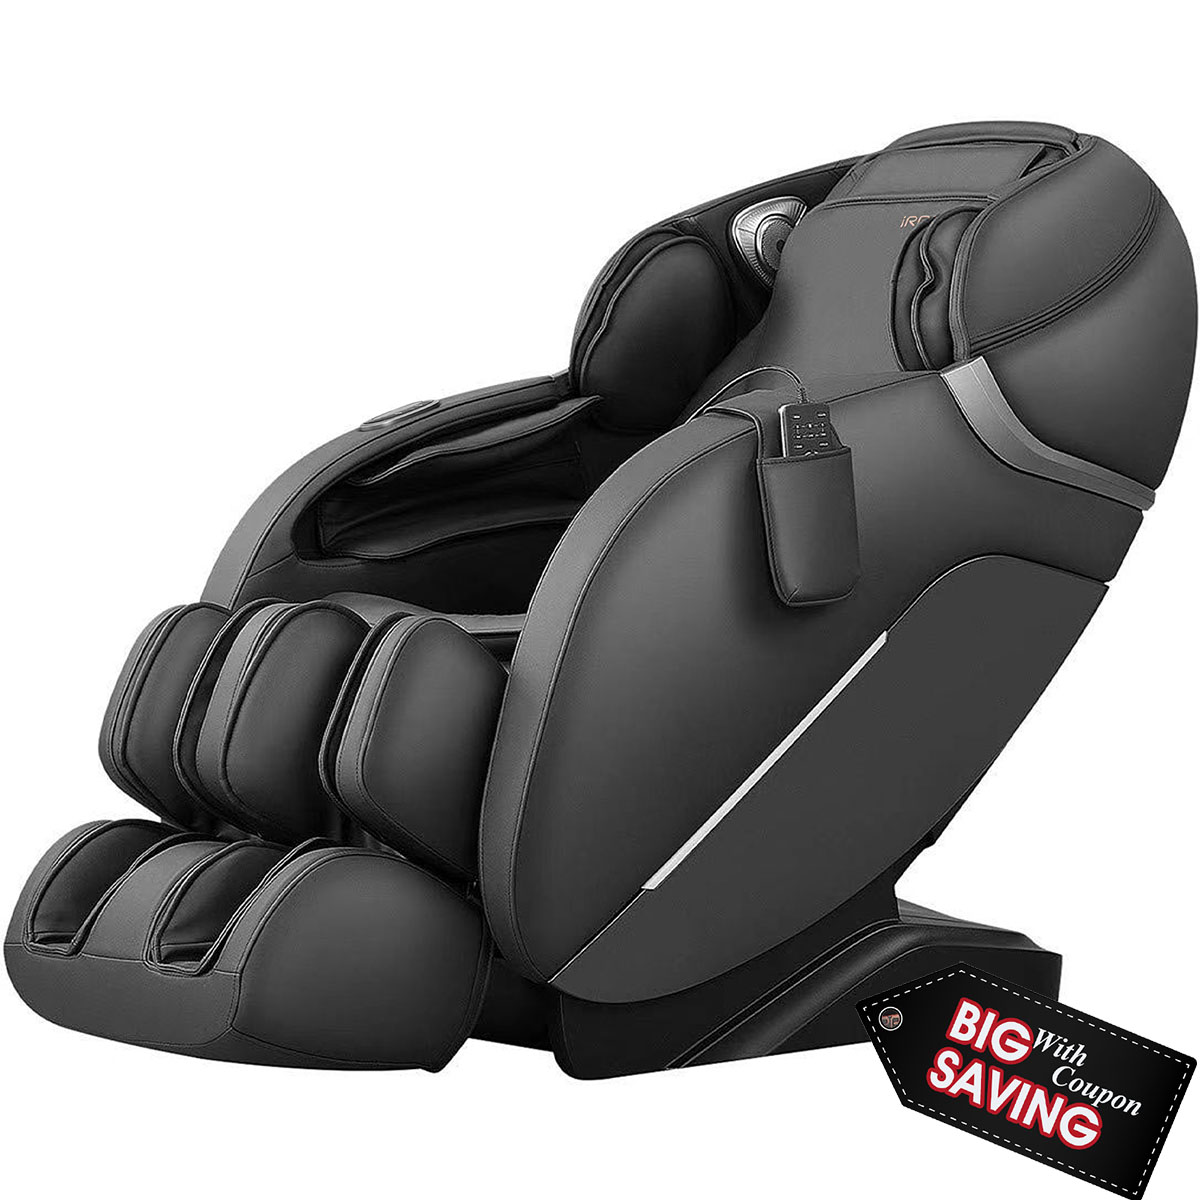 Irest A303 3d Sl Track Full Body Massage Chair